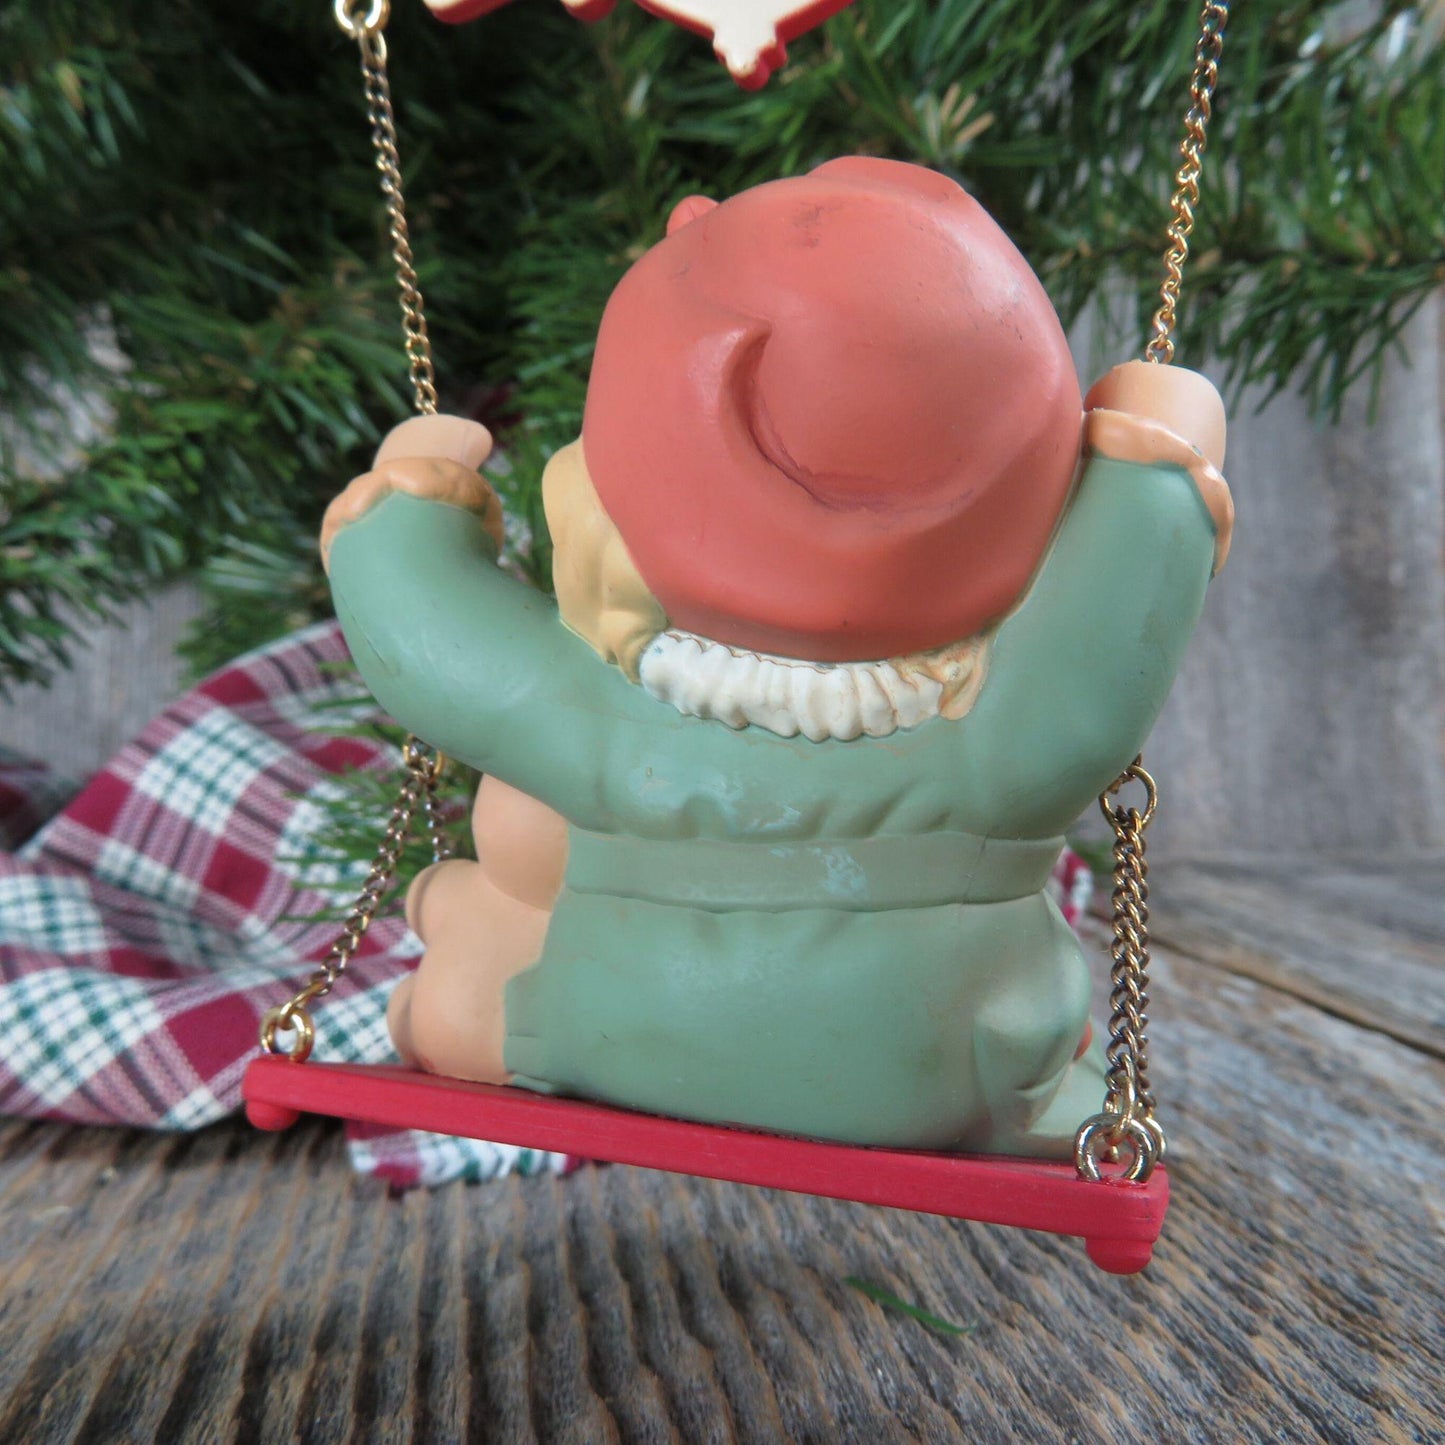 Vintage Girl Swinging with Teddy Bear Ornament Swing With Me Winter Memories of Yesterday by Enesco 1991